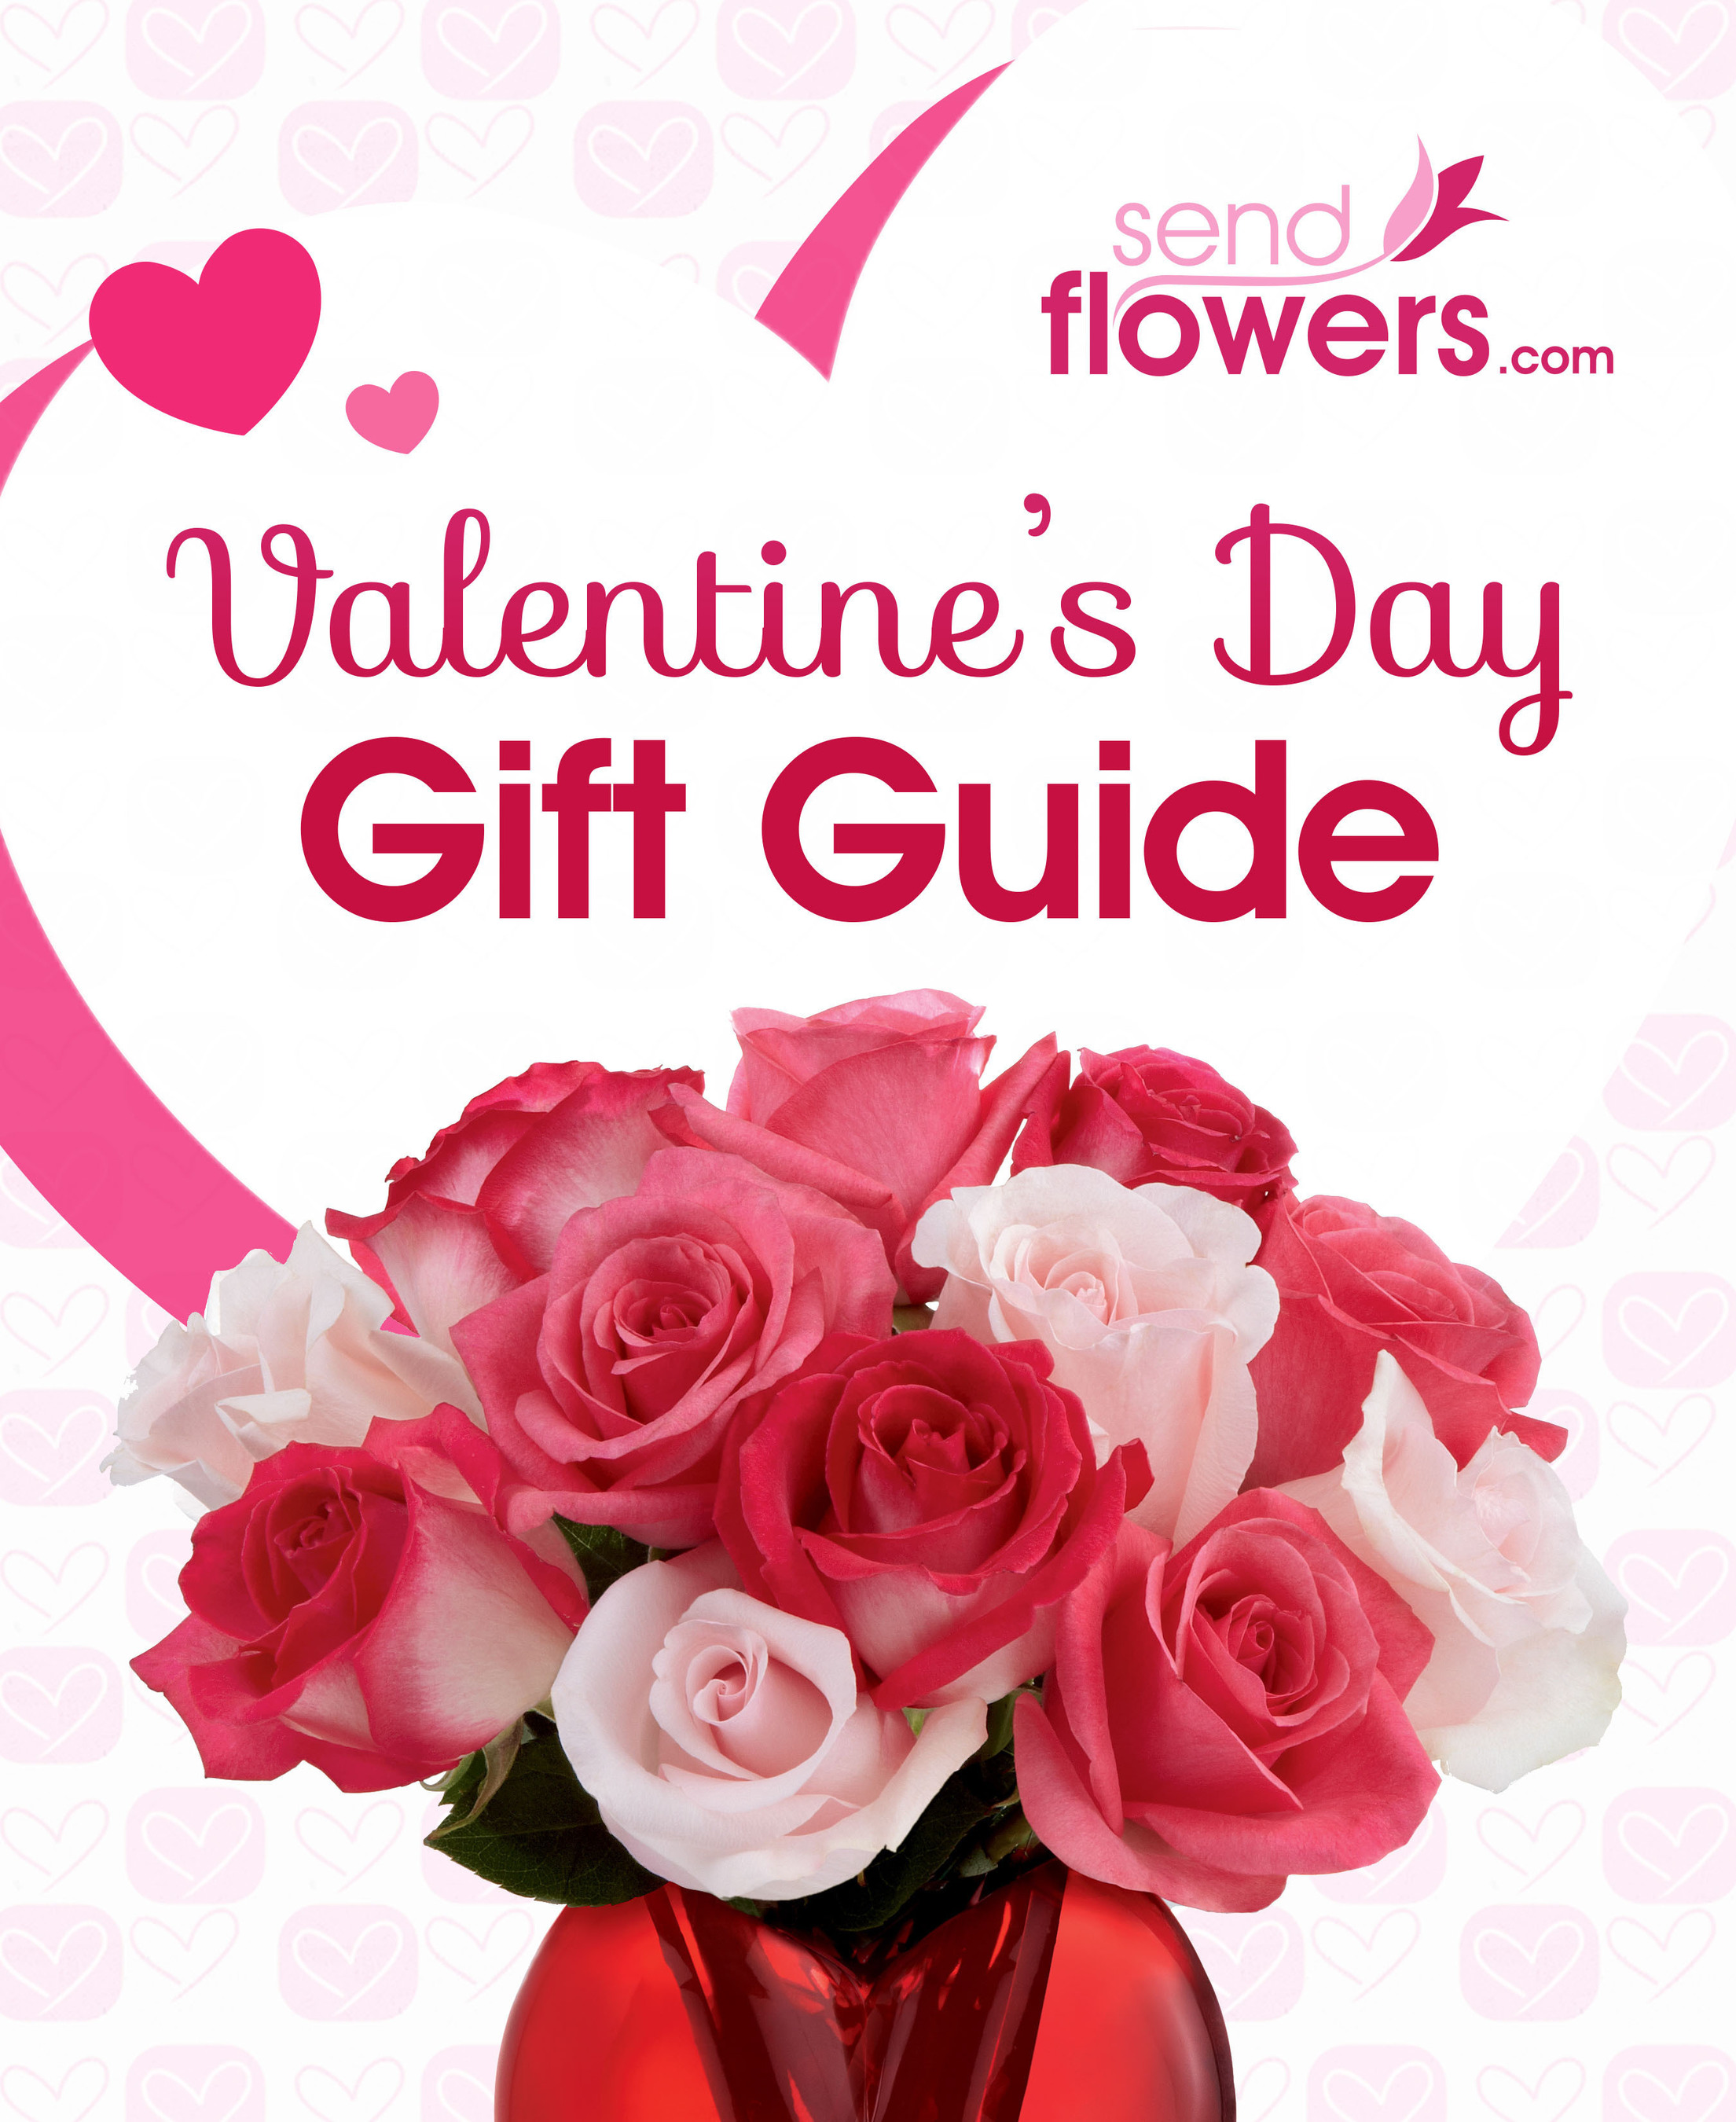 Send Flowers Launches 2014 Guide to Valentine's Day Gifts, Delivered to Home or Office. (PRNewsFoto/SendFlowers.com) (PRNewsFoto/SENDFLOWERS.COM)